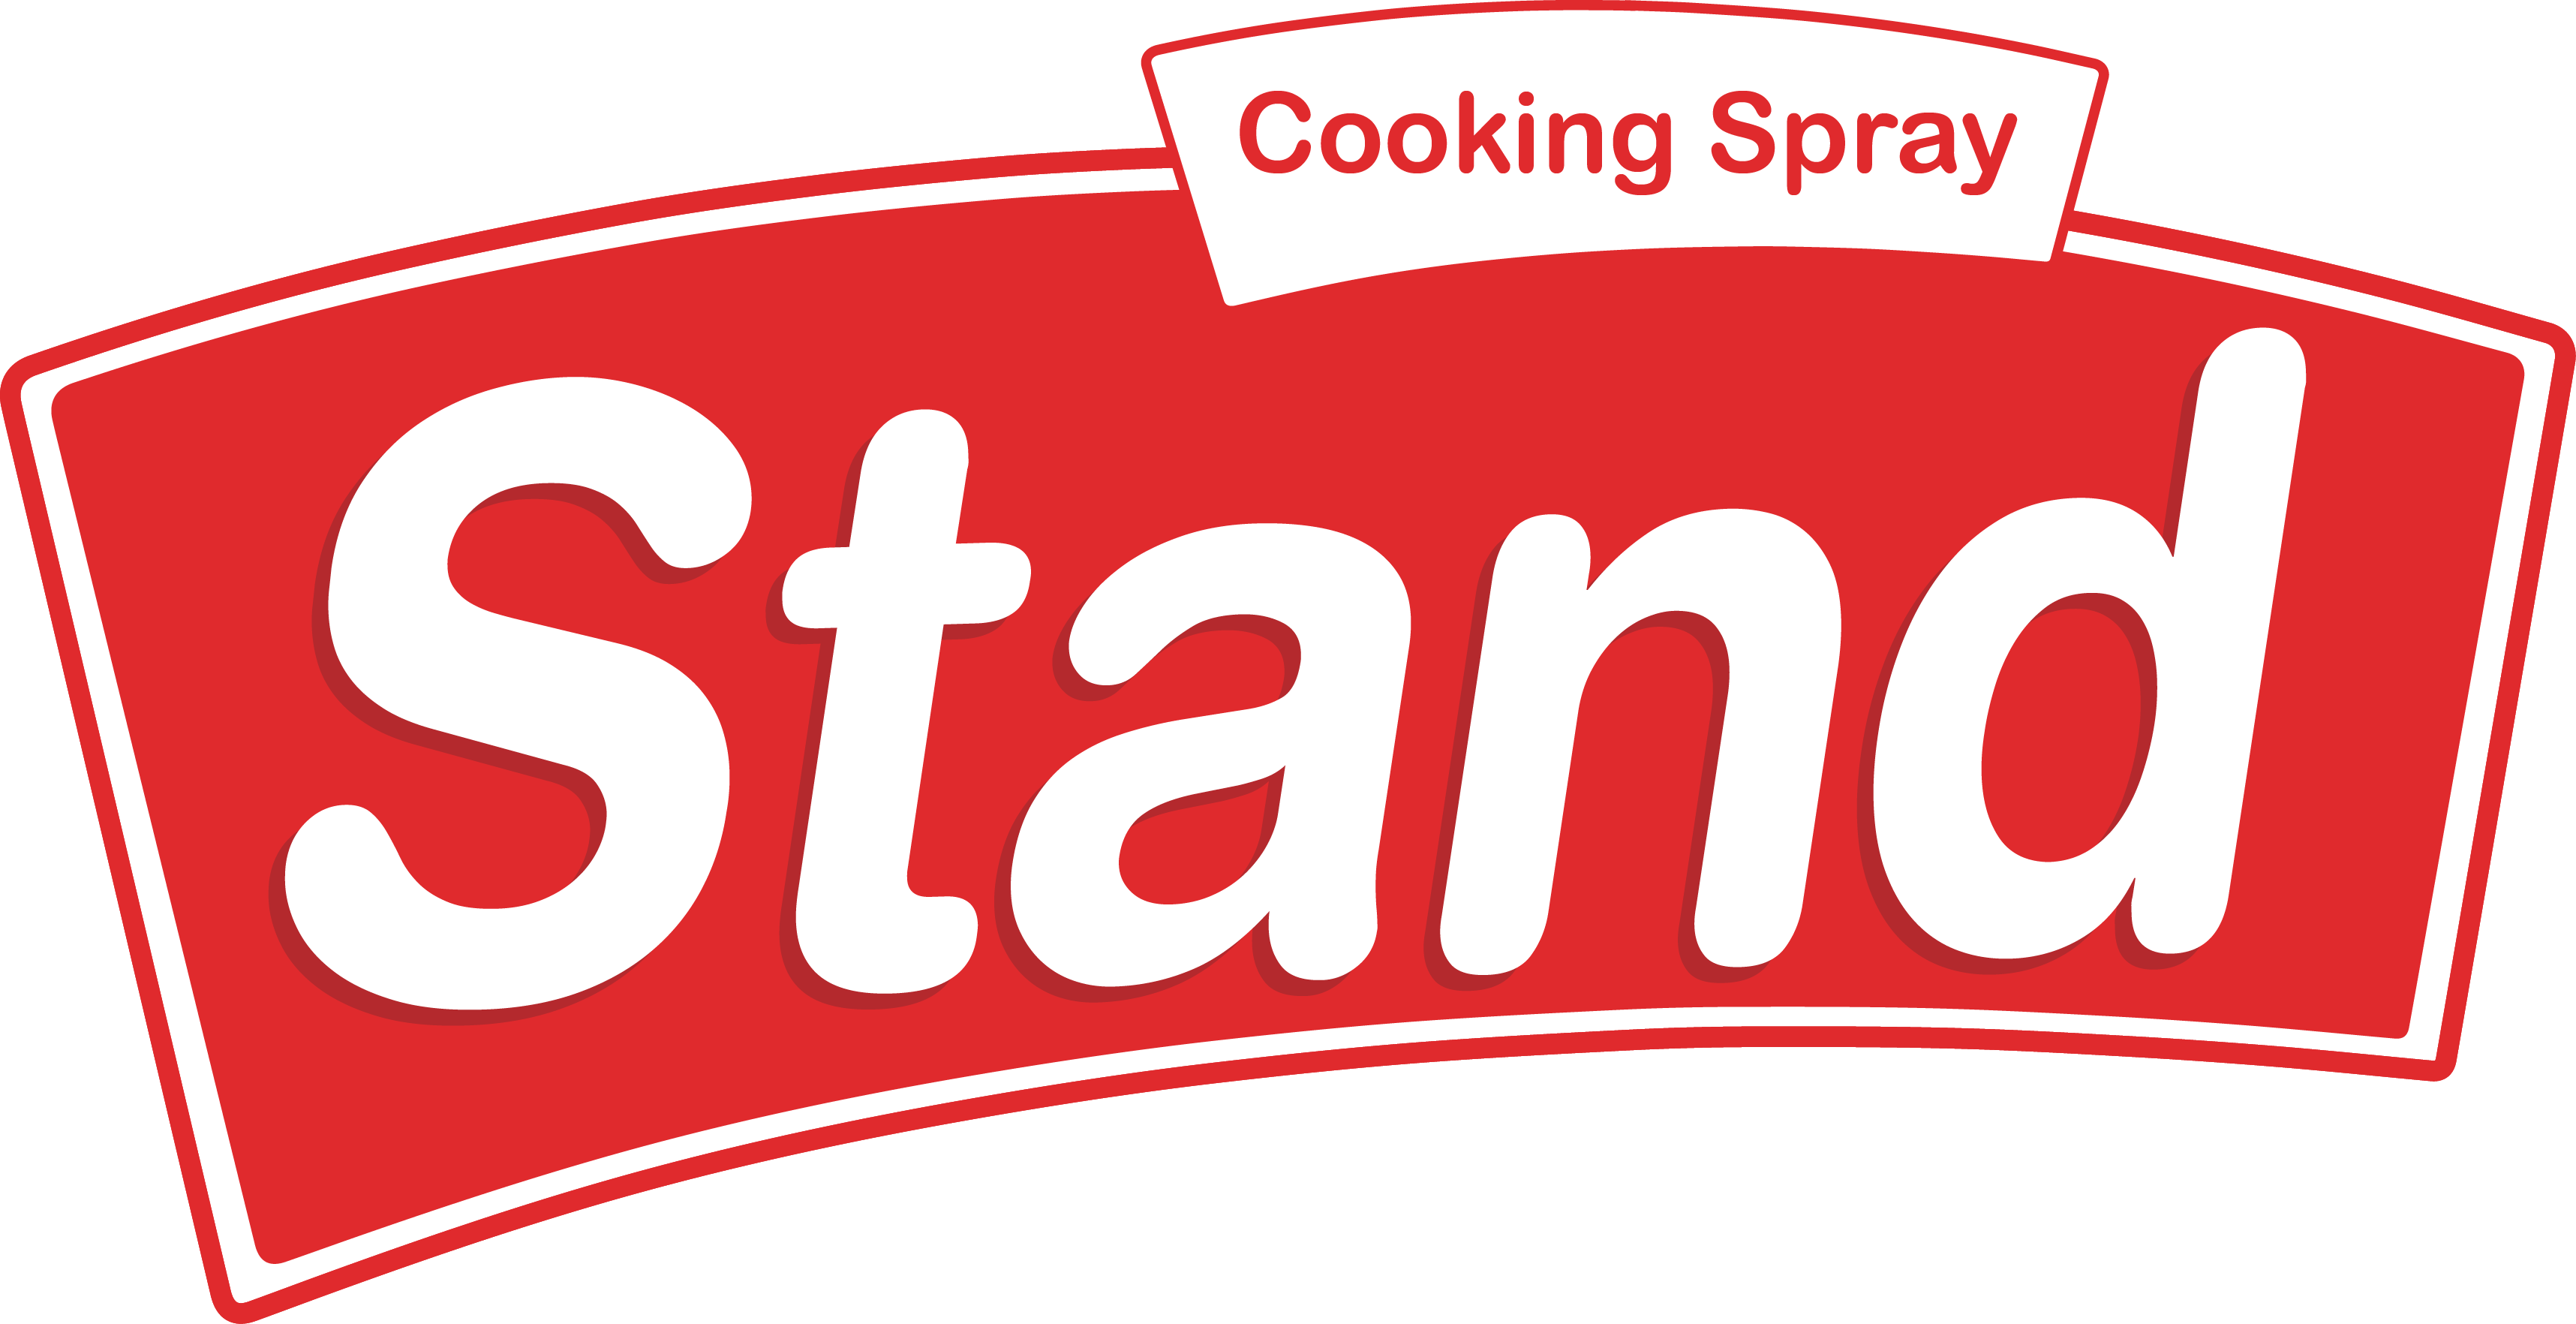 Stand Cooking Spray - Graphic Design (3433x1764)